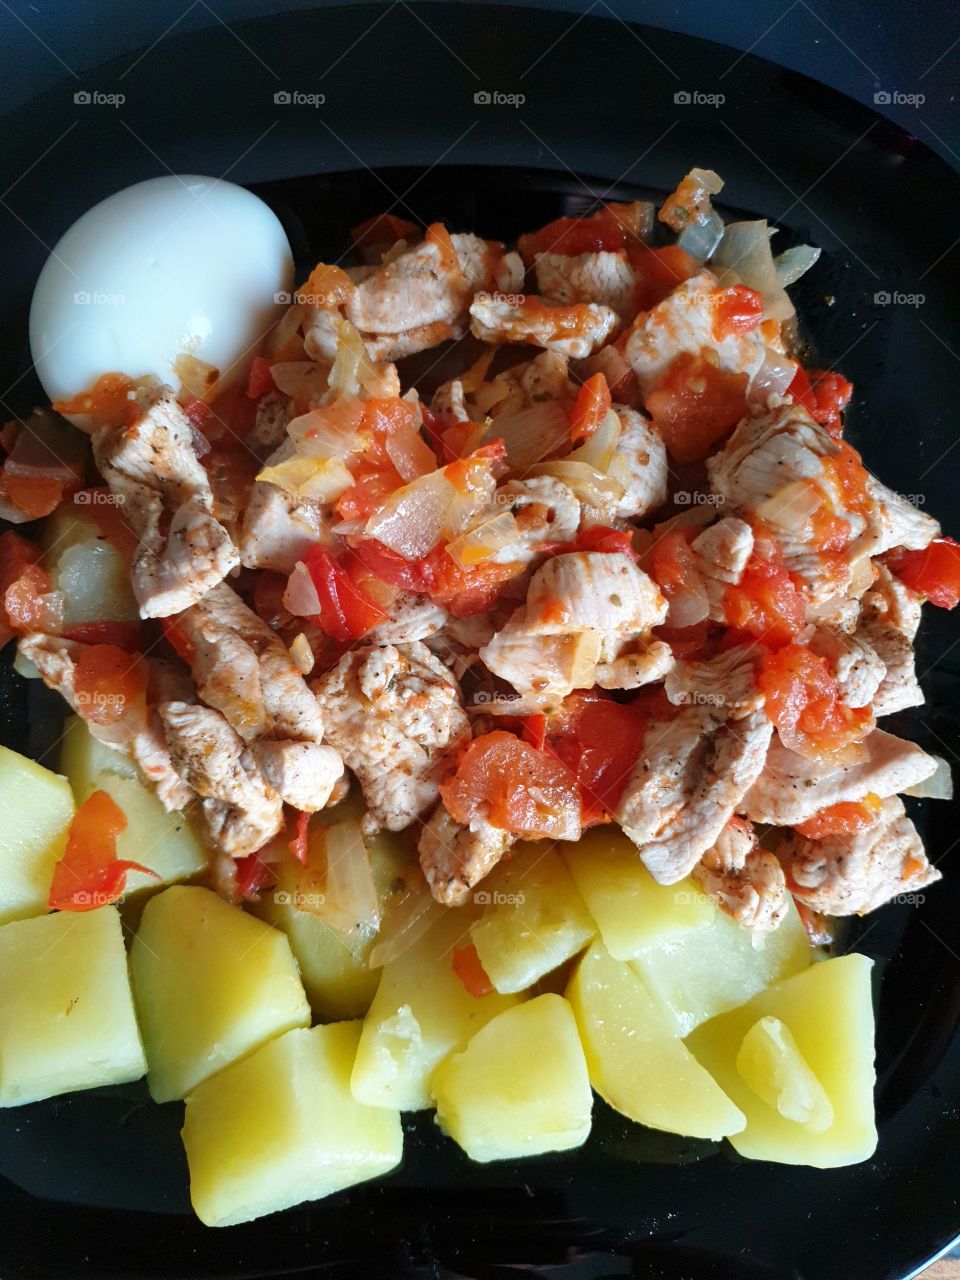 Healthy food. Chicken breasts seasoned with pepper and oregano, with tomatoes and onions, boiled potatoes and a boiled egg on a black glass plate